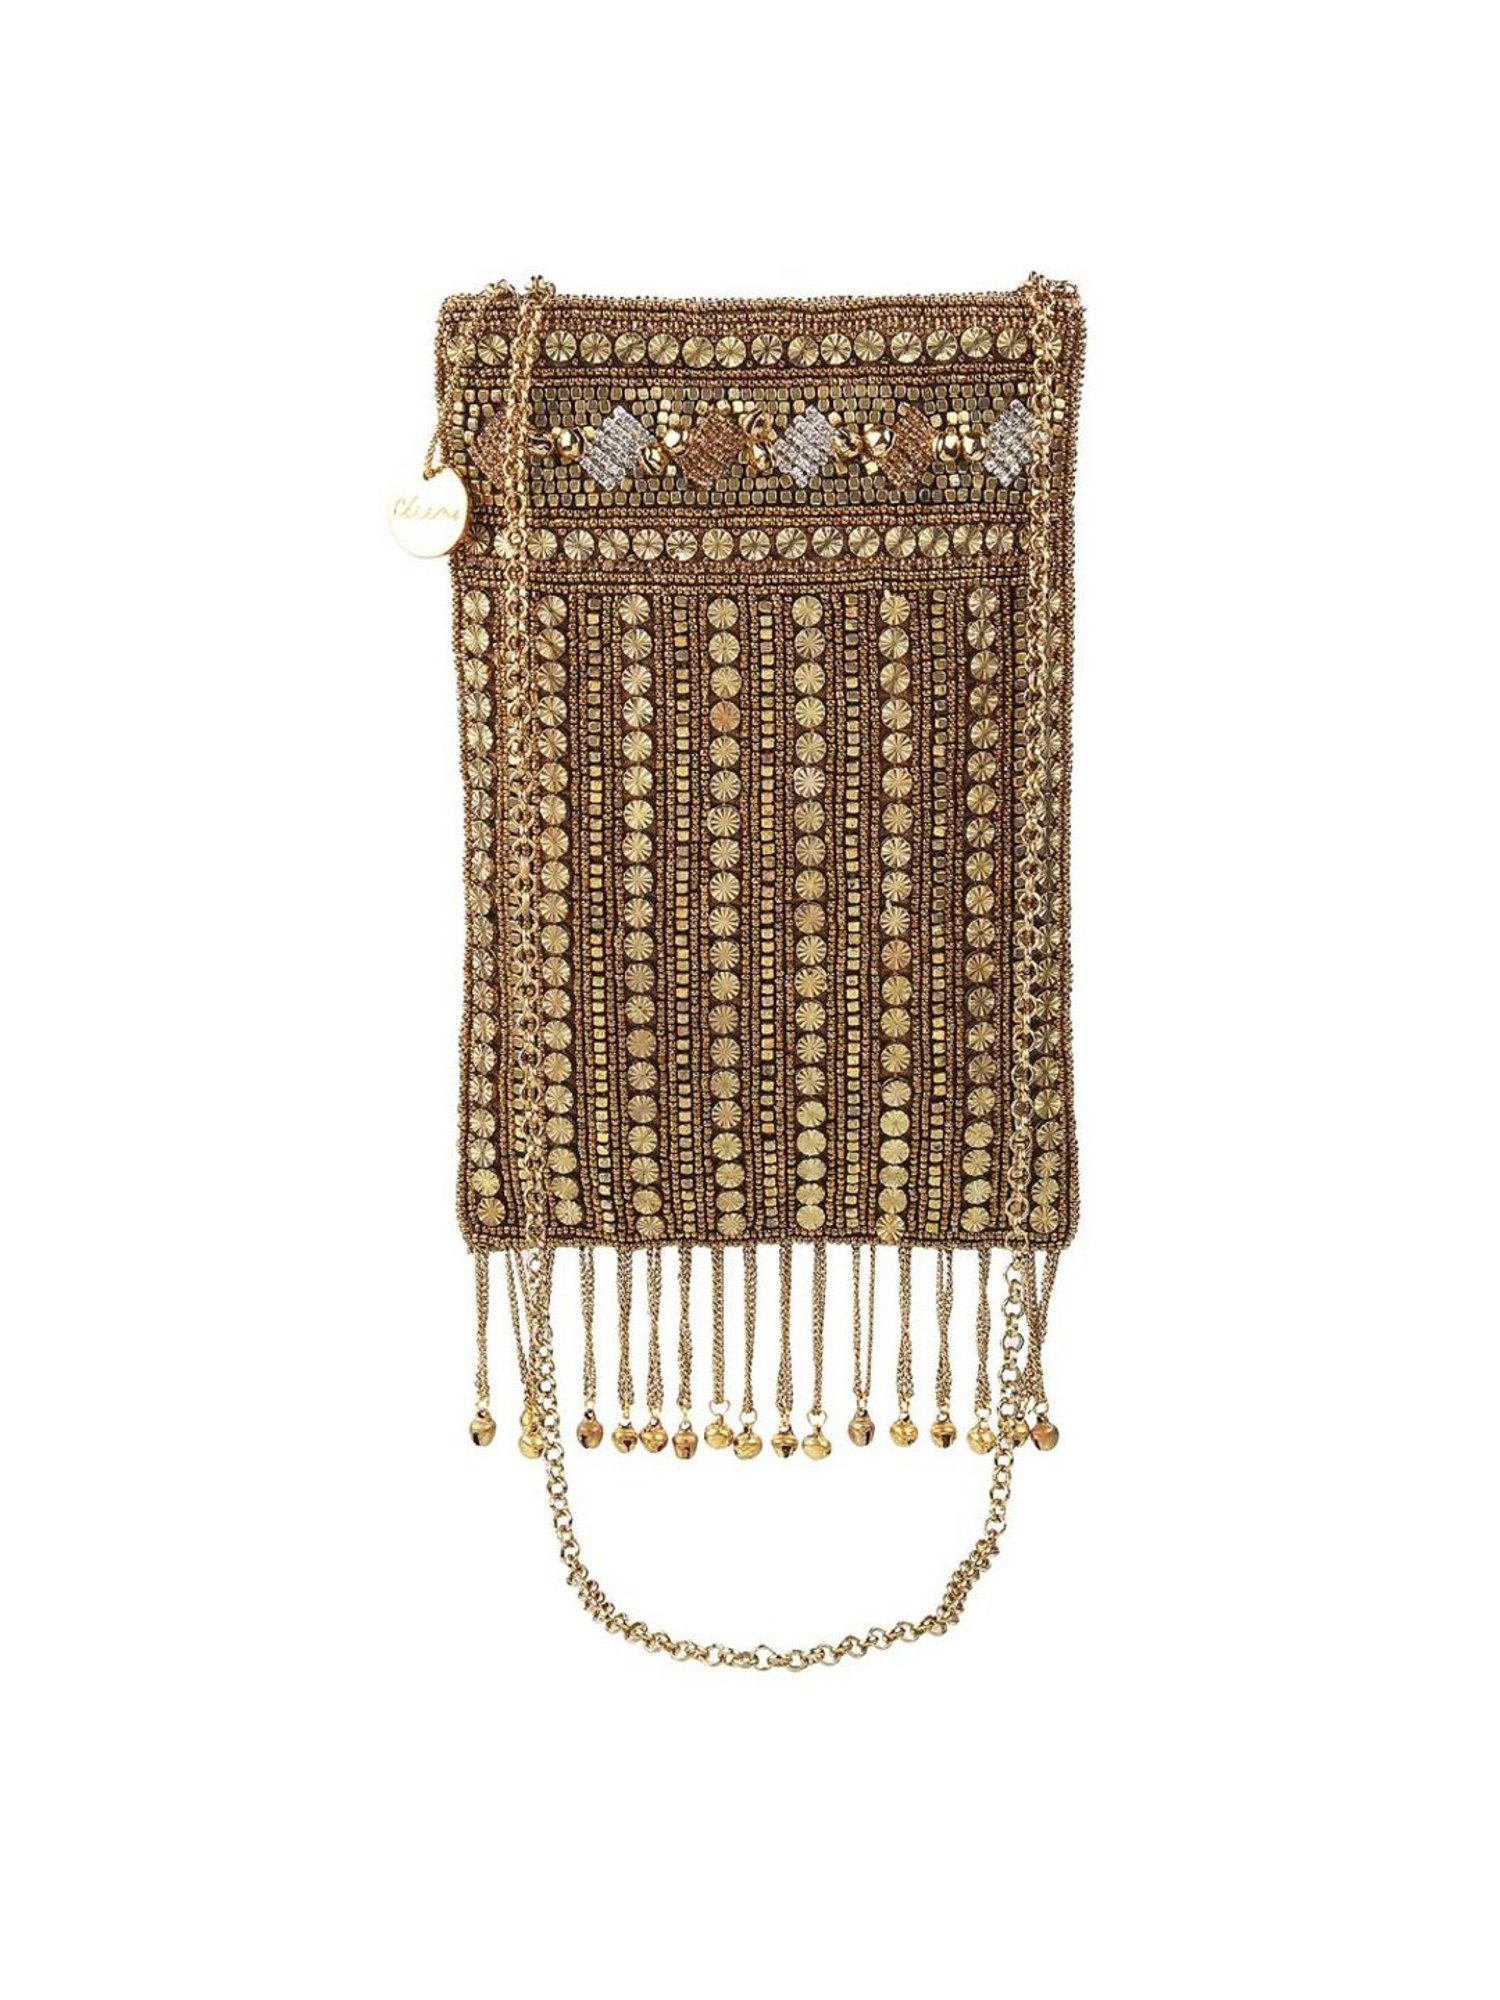 Buy Cheemo Brown Embellished Mobile Pouch Online At Best Price @ Tata CLiQ